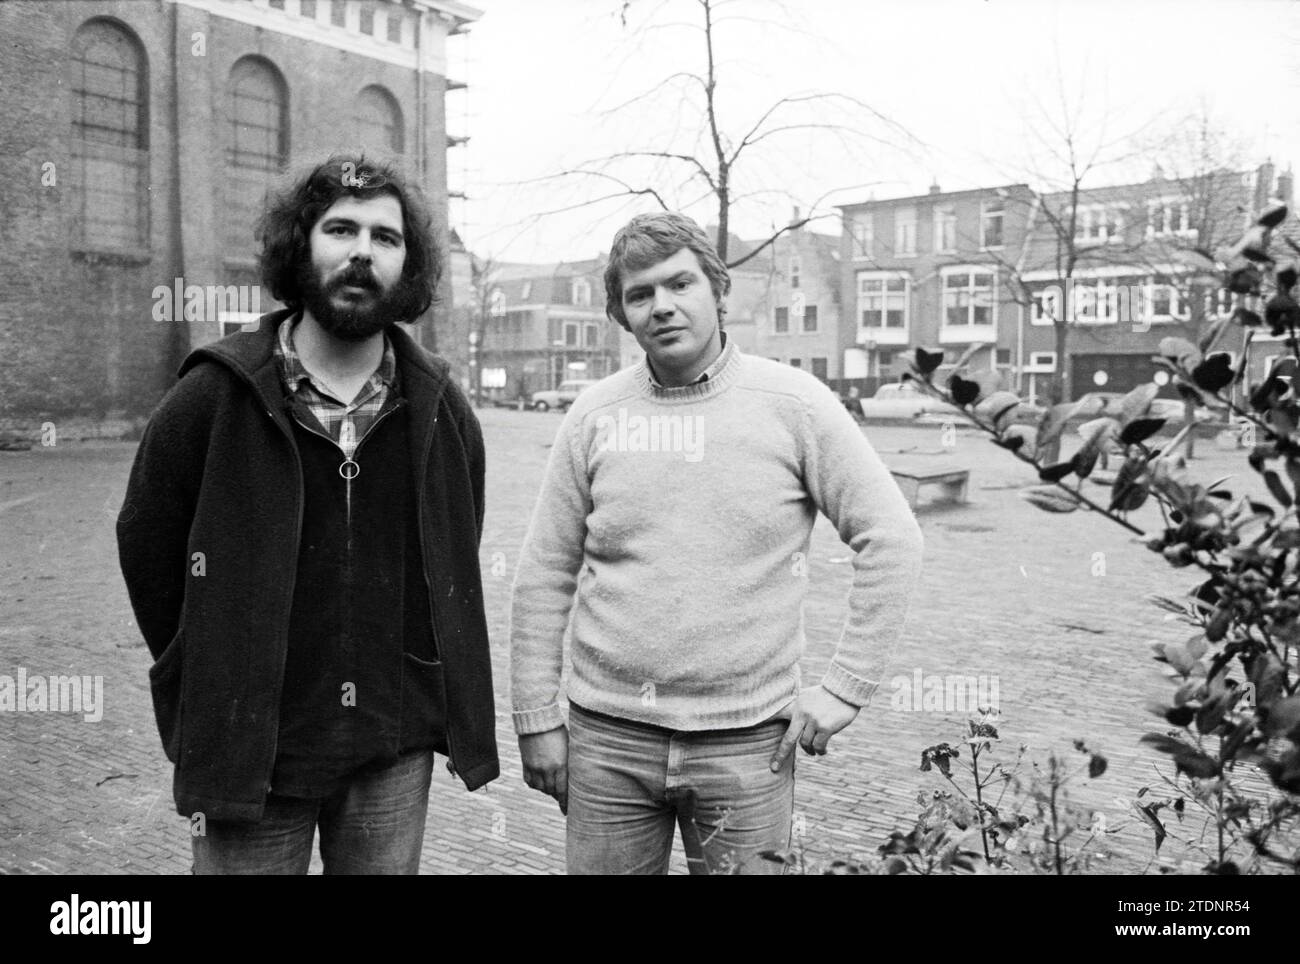 Visual artist Max Koning and Peter van Lavière, owner of café 'De Wandelaar', initiators of the annual Christmas carol on the Nieuwe Kerksplein, Festivities, Haarlem, Nieuwe Kerksplein, Nederland, 29-11-1977, Whizgle News from the Past, Tailored for the Future. Explore historical narratives, Dutch The Netherlands agency image with a modern perspective, bridging the gap between yesterday's events and tomorrow's insights. A timeless journey shaping the stories that shape our future Stock Photo